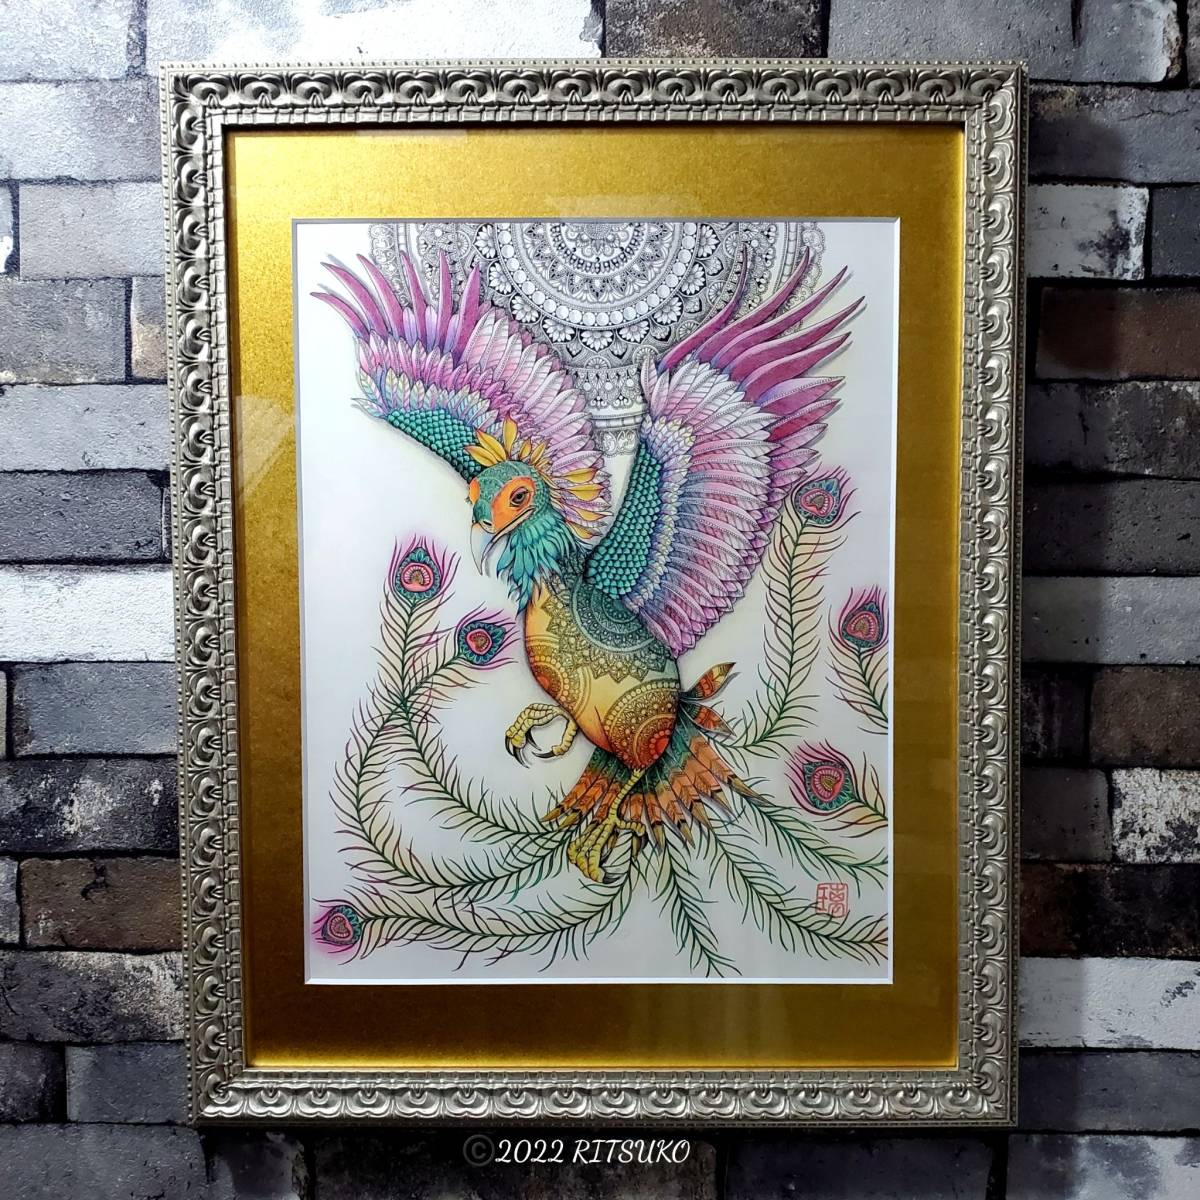 Good luck, original painting, one of a kind, ballpoint pen art, framed, colored pencil drawing, ballpoint pen drawing, Japanese artist, hand-painted, painting, picture, art, Firebird, Phoenix, luxuriously framed, Artwork, Painting, others